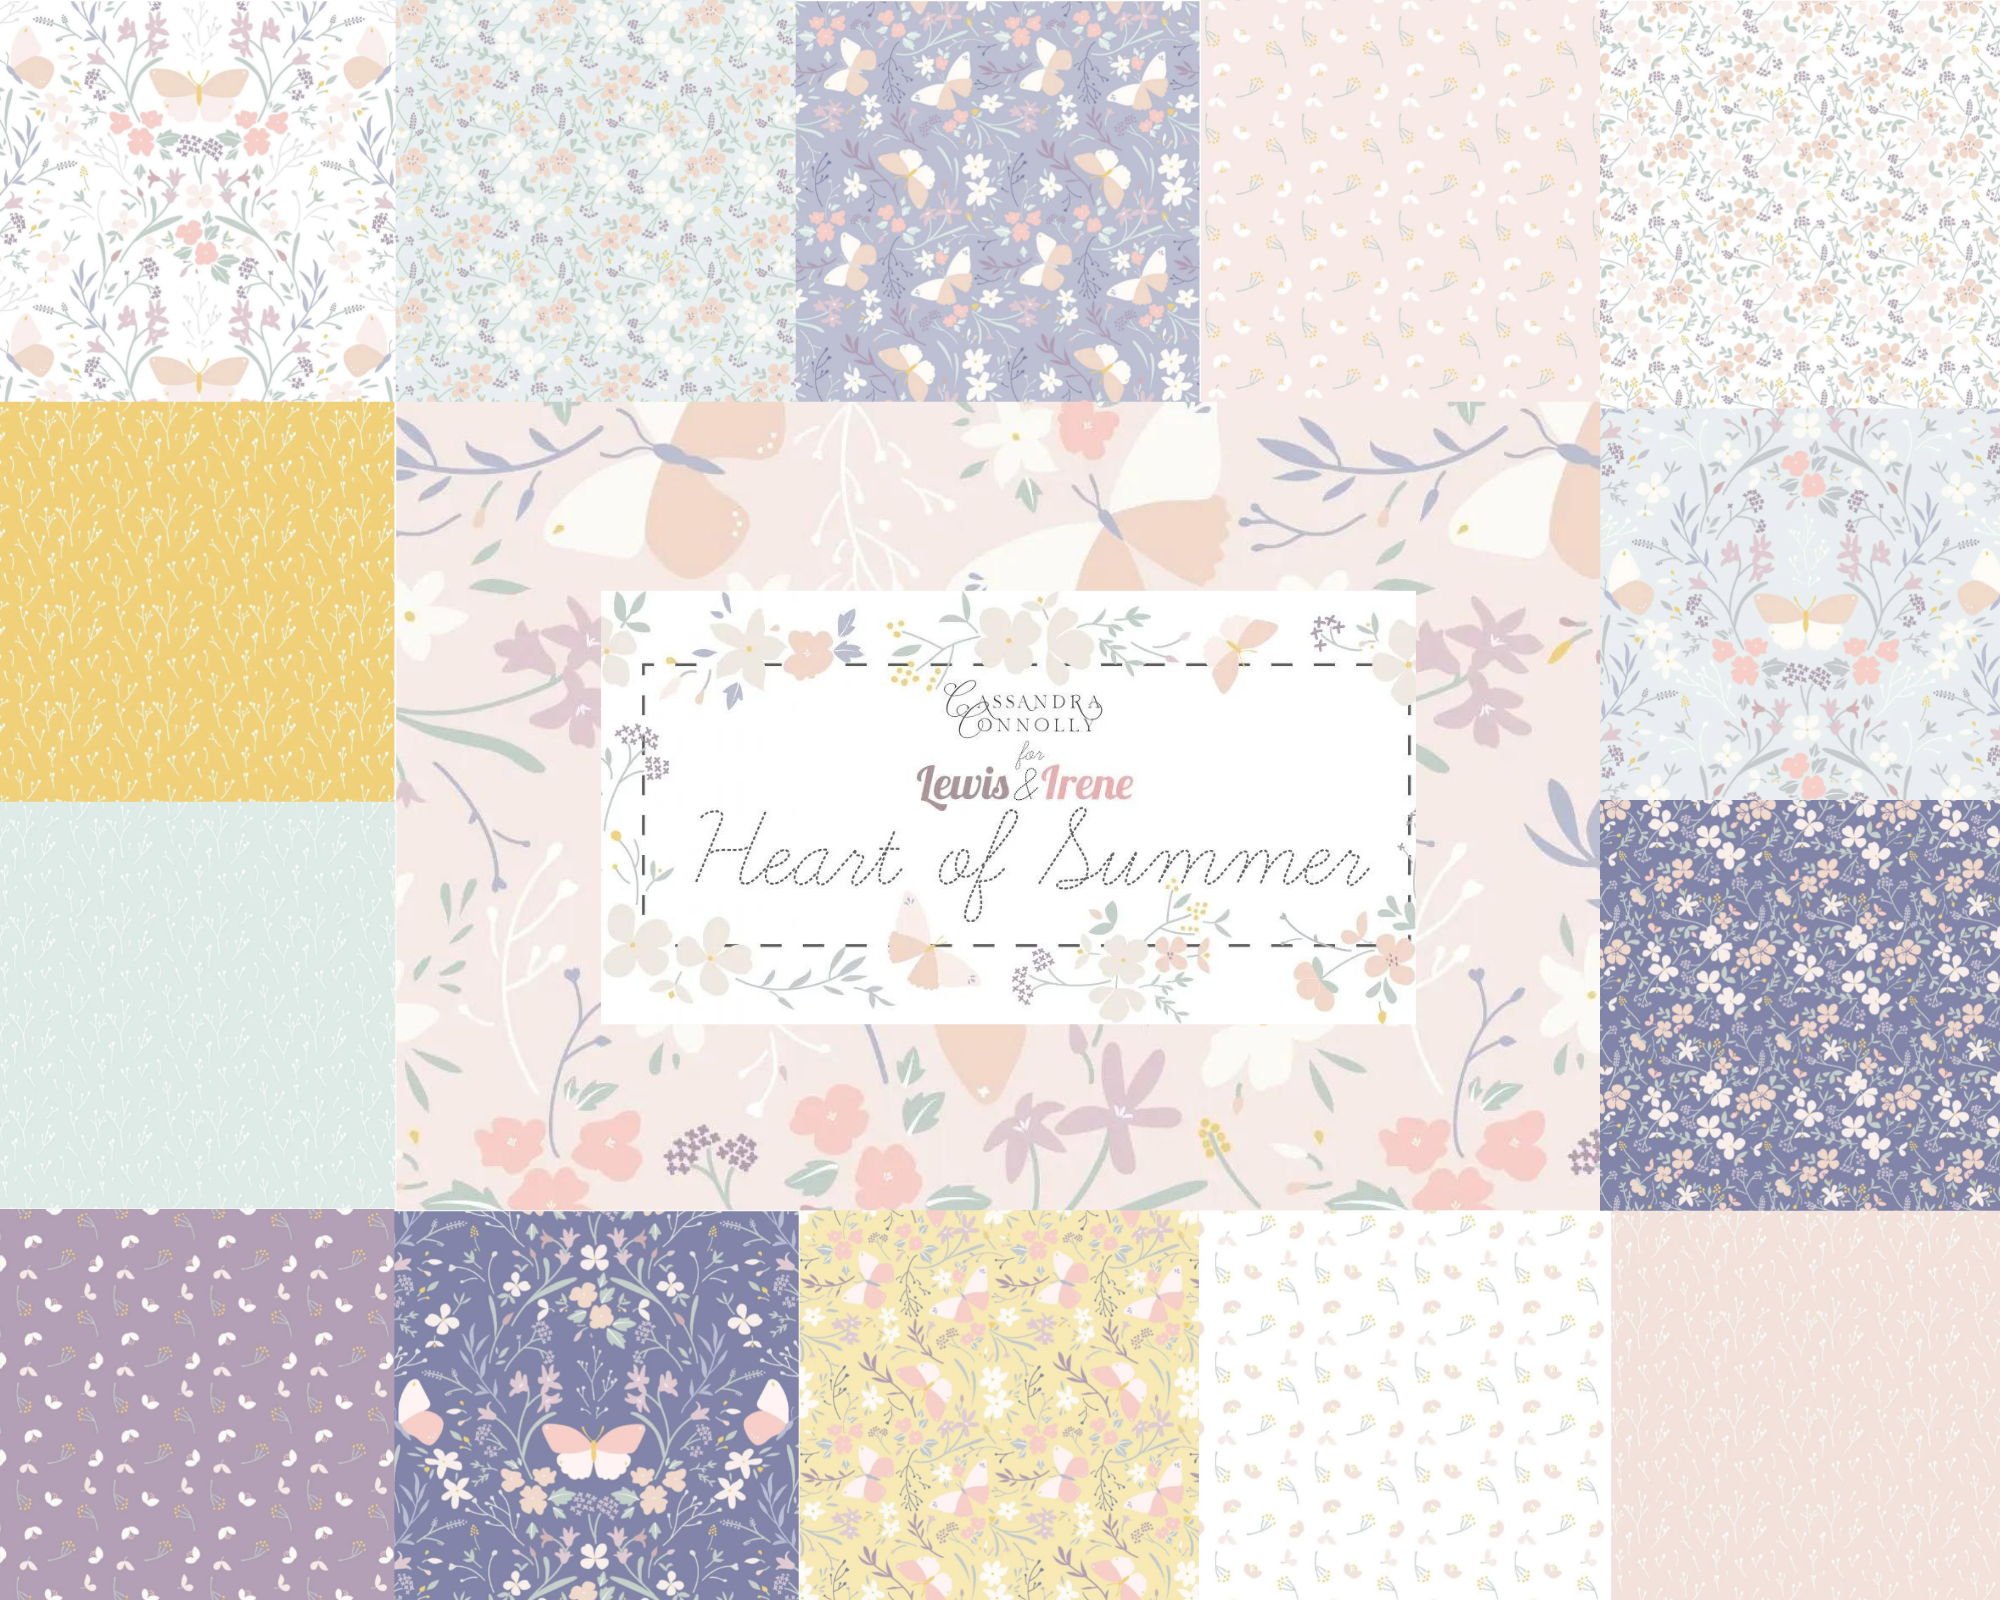 Pastel Flowers on duck egg blue cotton fabric - Lewis & Irene